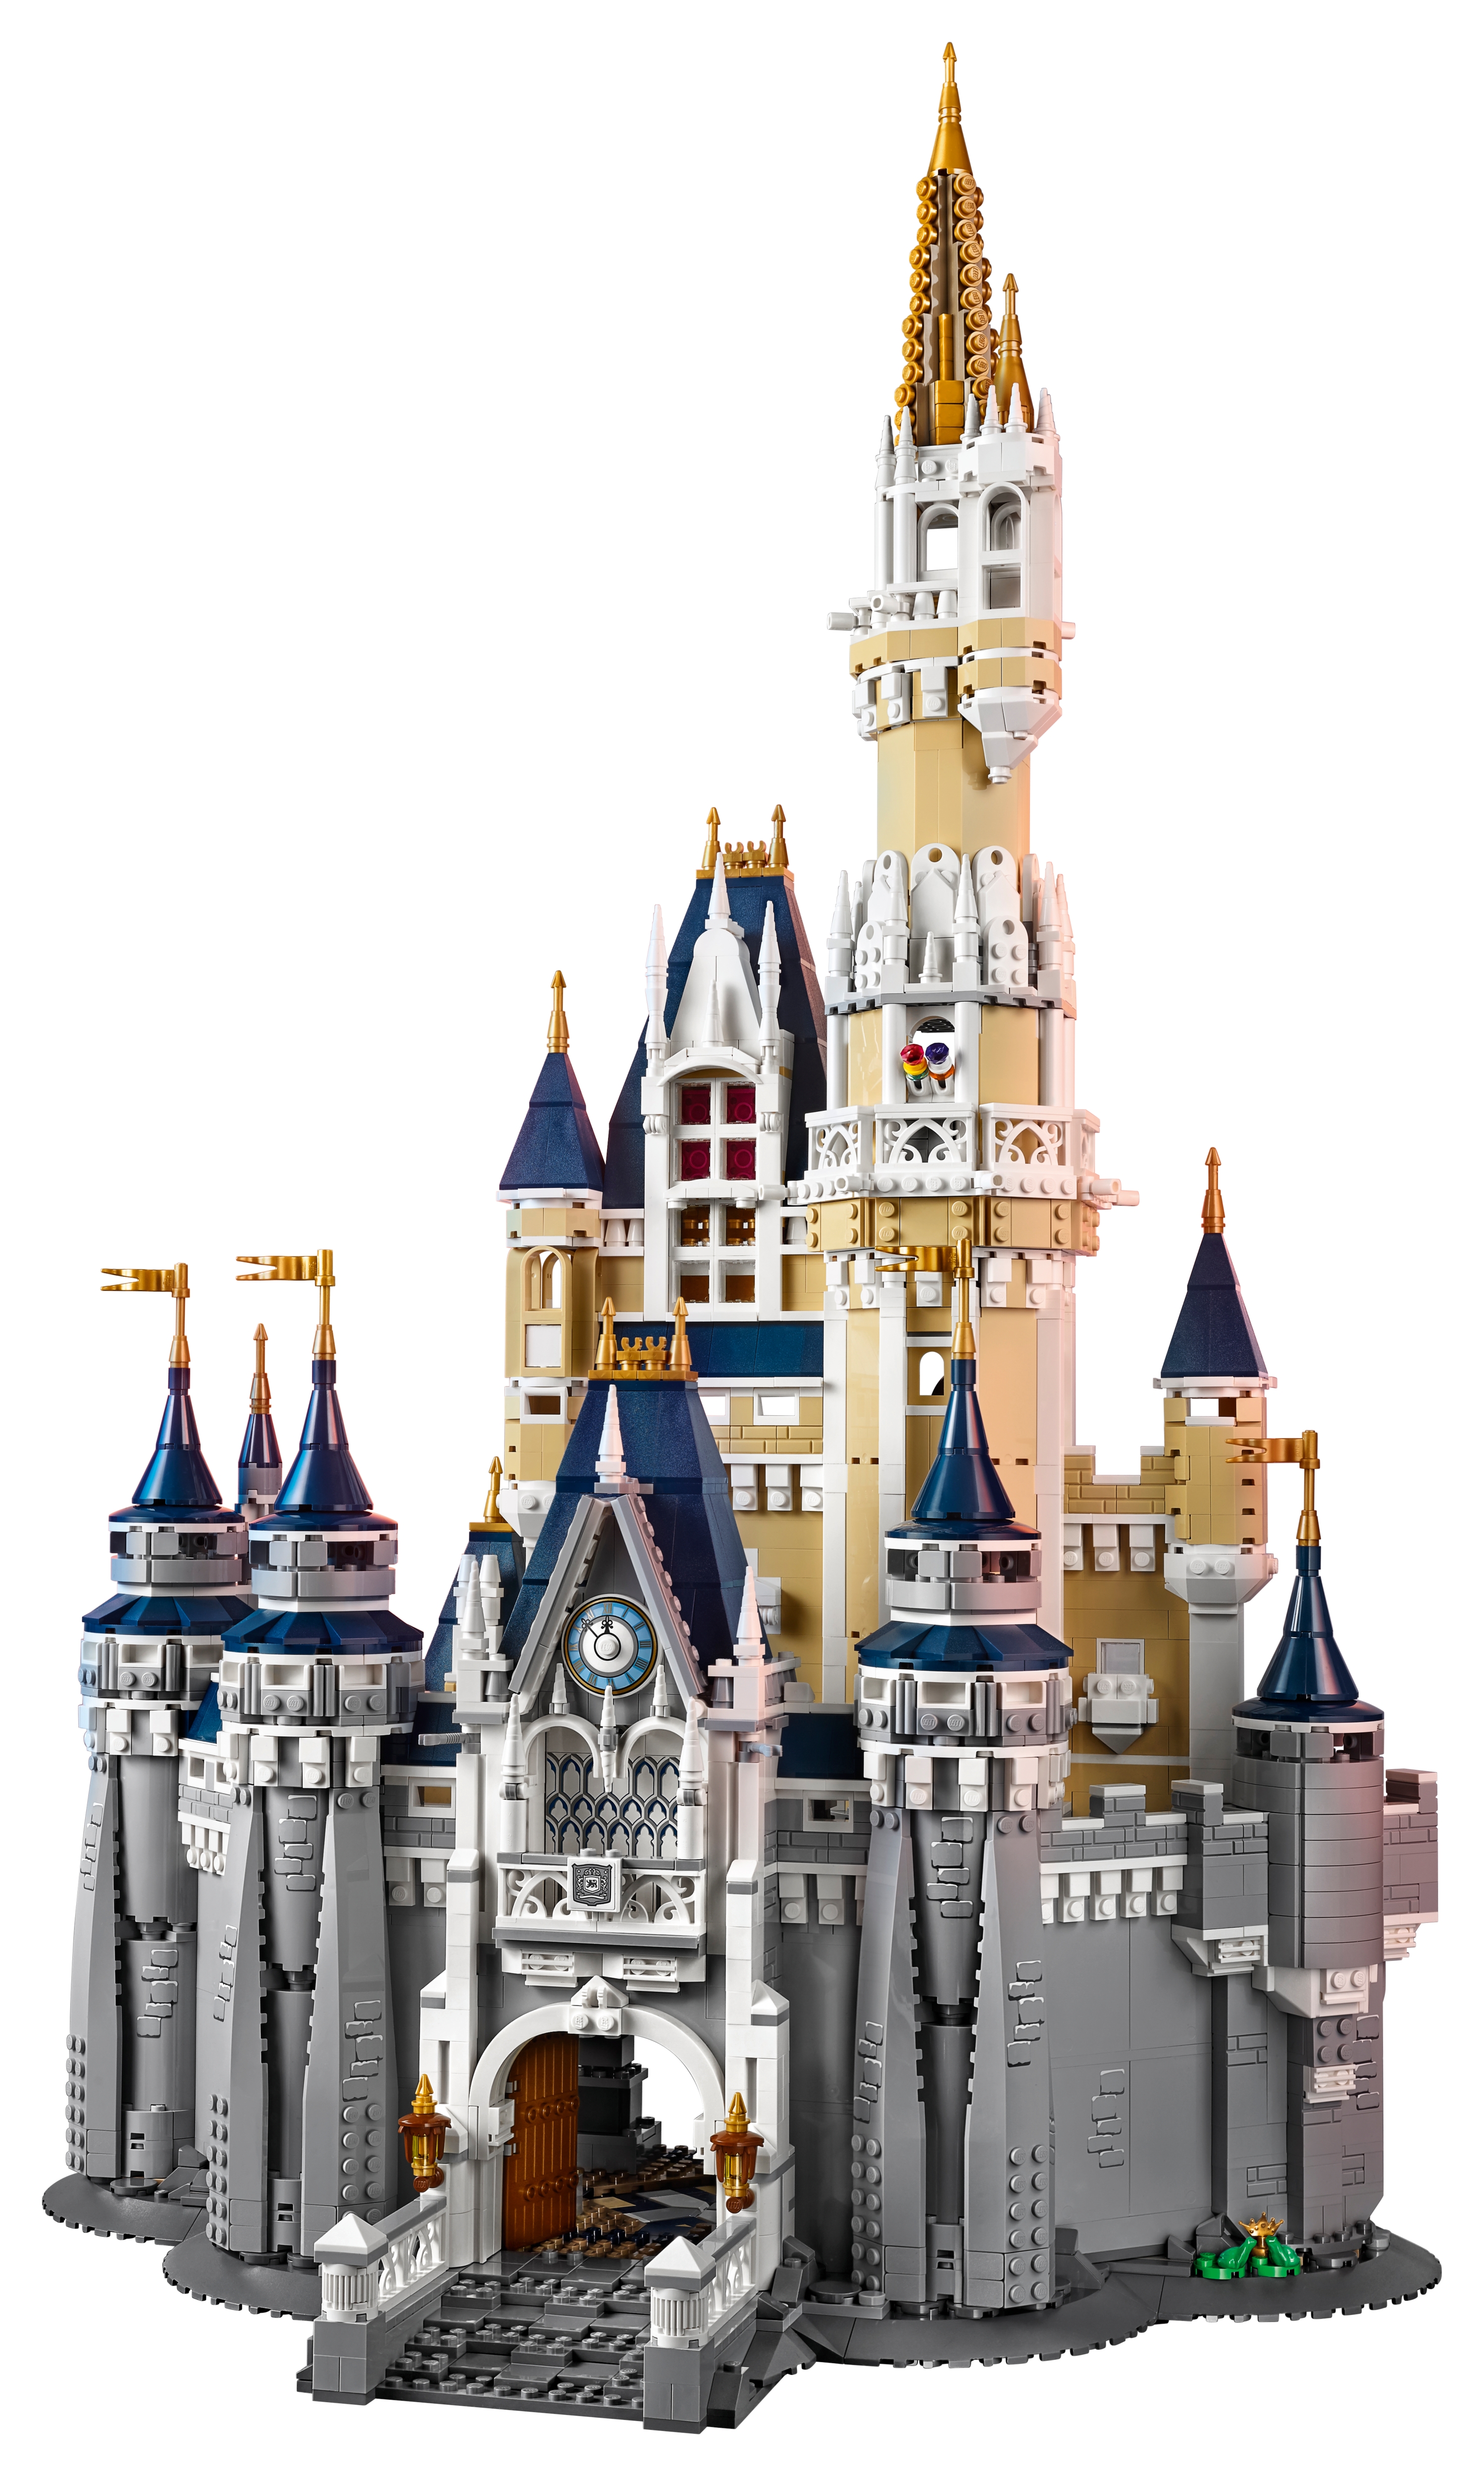 The Castle 71040 | online at the Official LEGO® Shop US